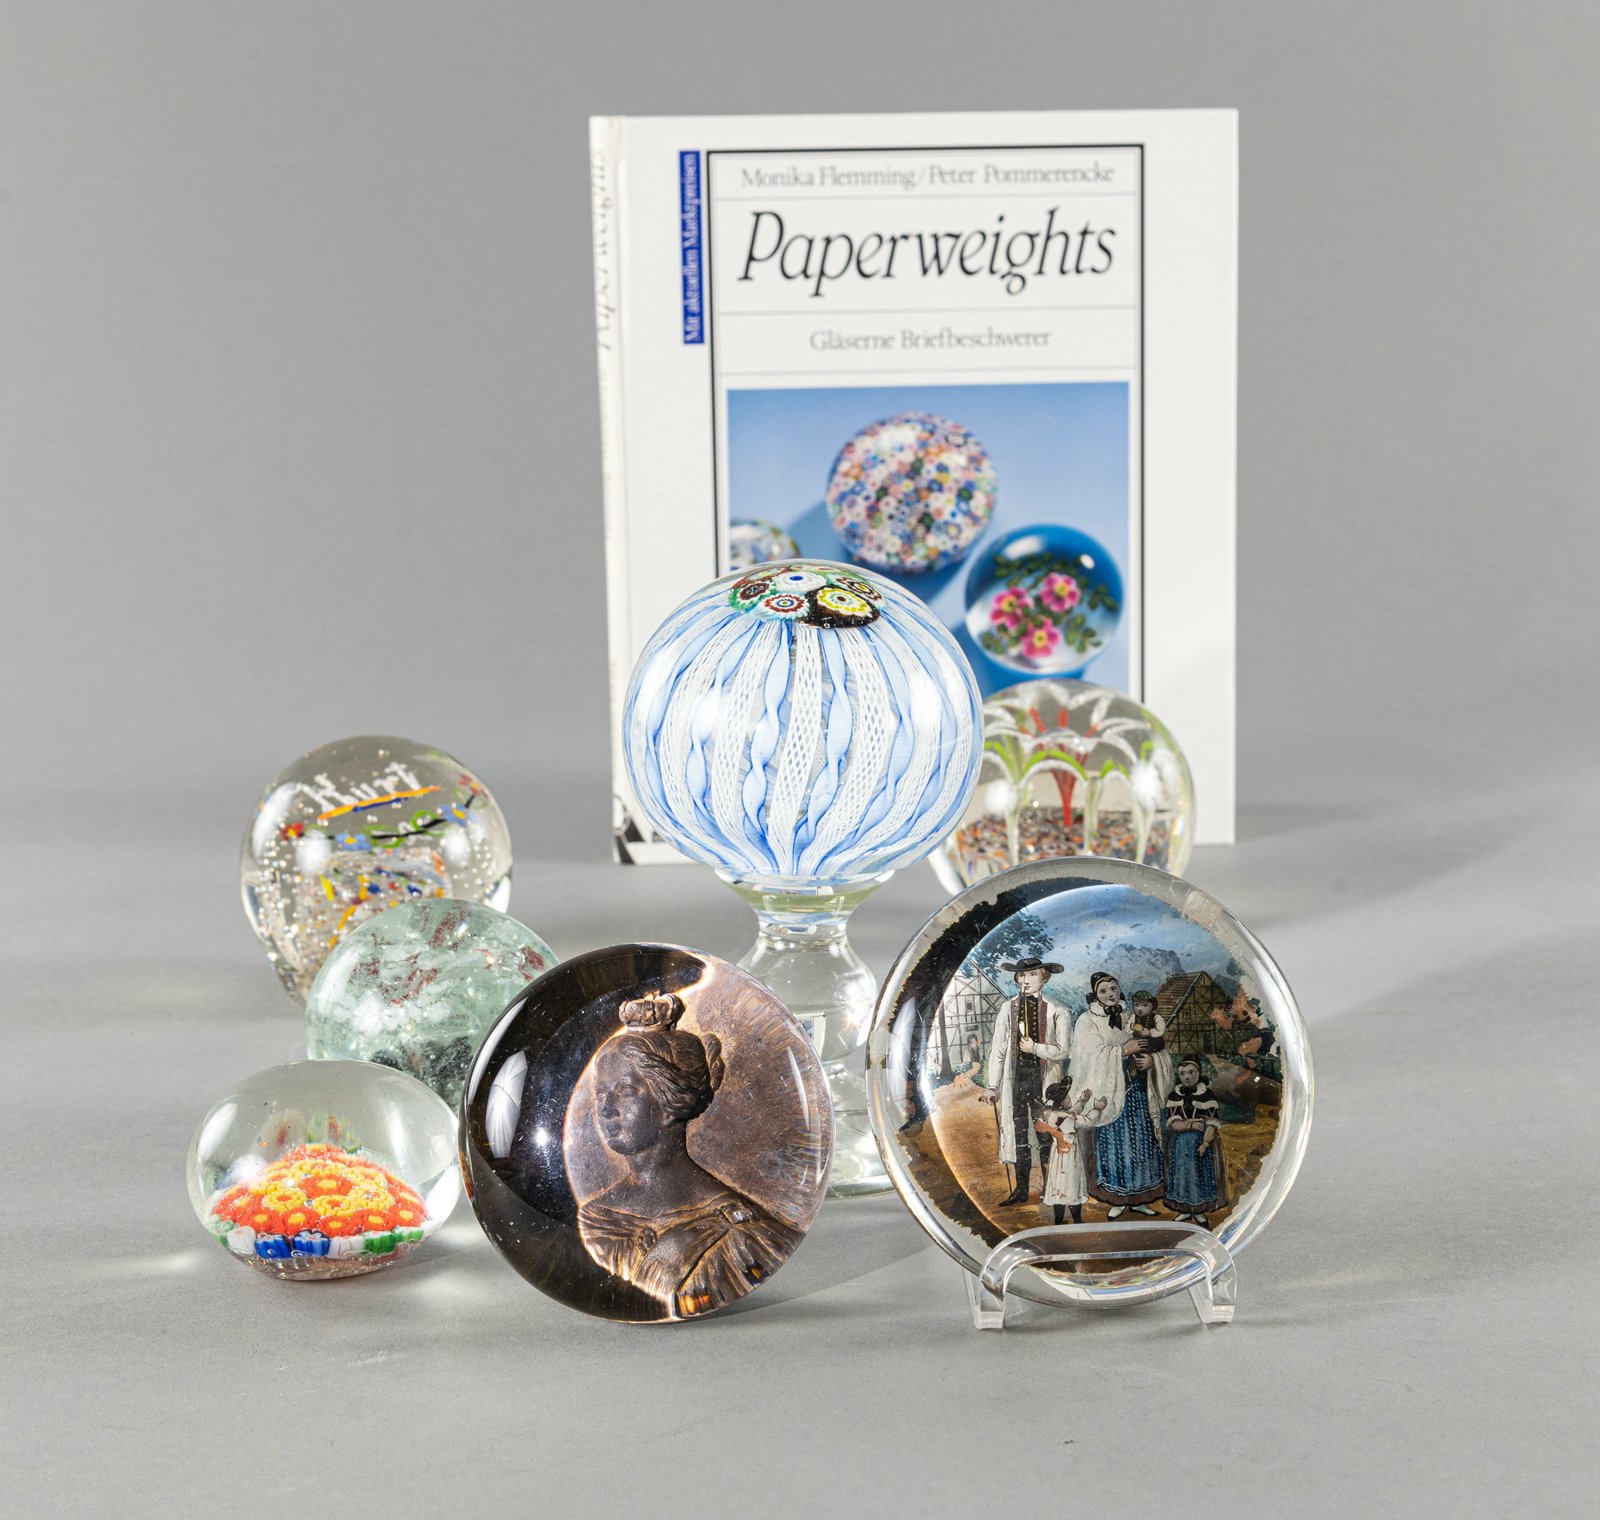 SEVEN PAPERWEIGHTS AND BATTENBERG PAPERWEIGHT BOOK - Image 4 of 6